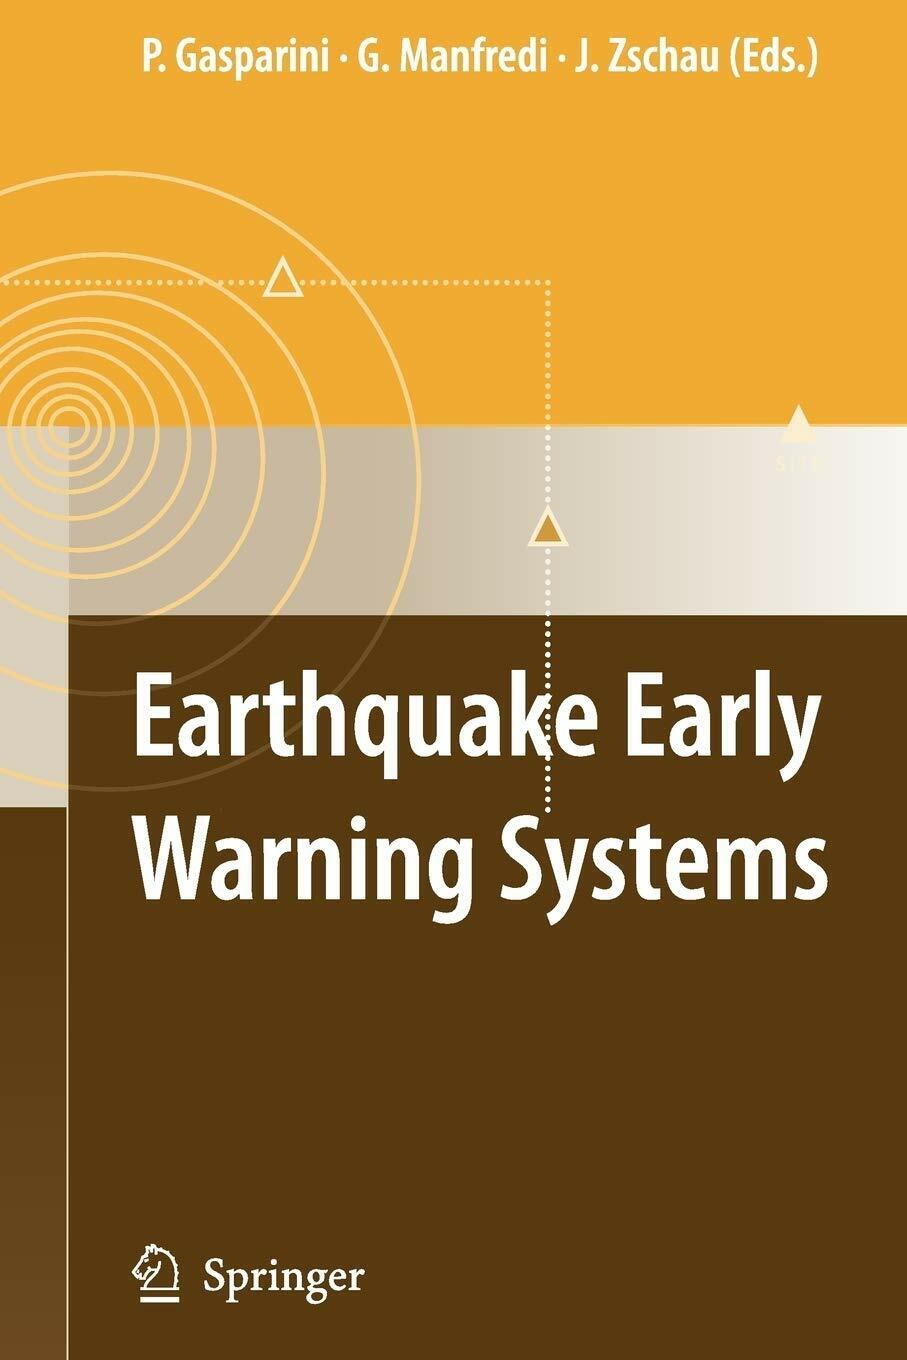 Earthquake Early Warning Systems - Paolo Gasparini - Springer, 2010